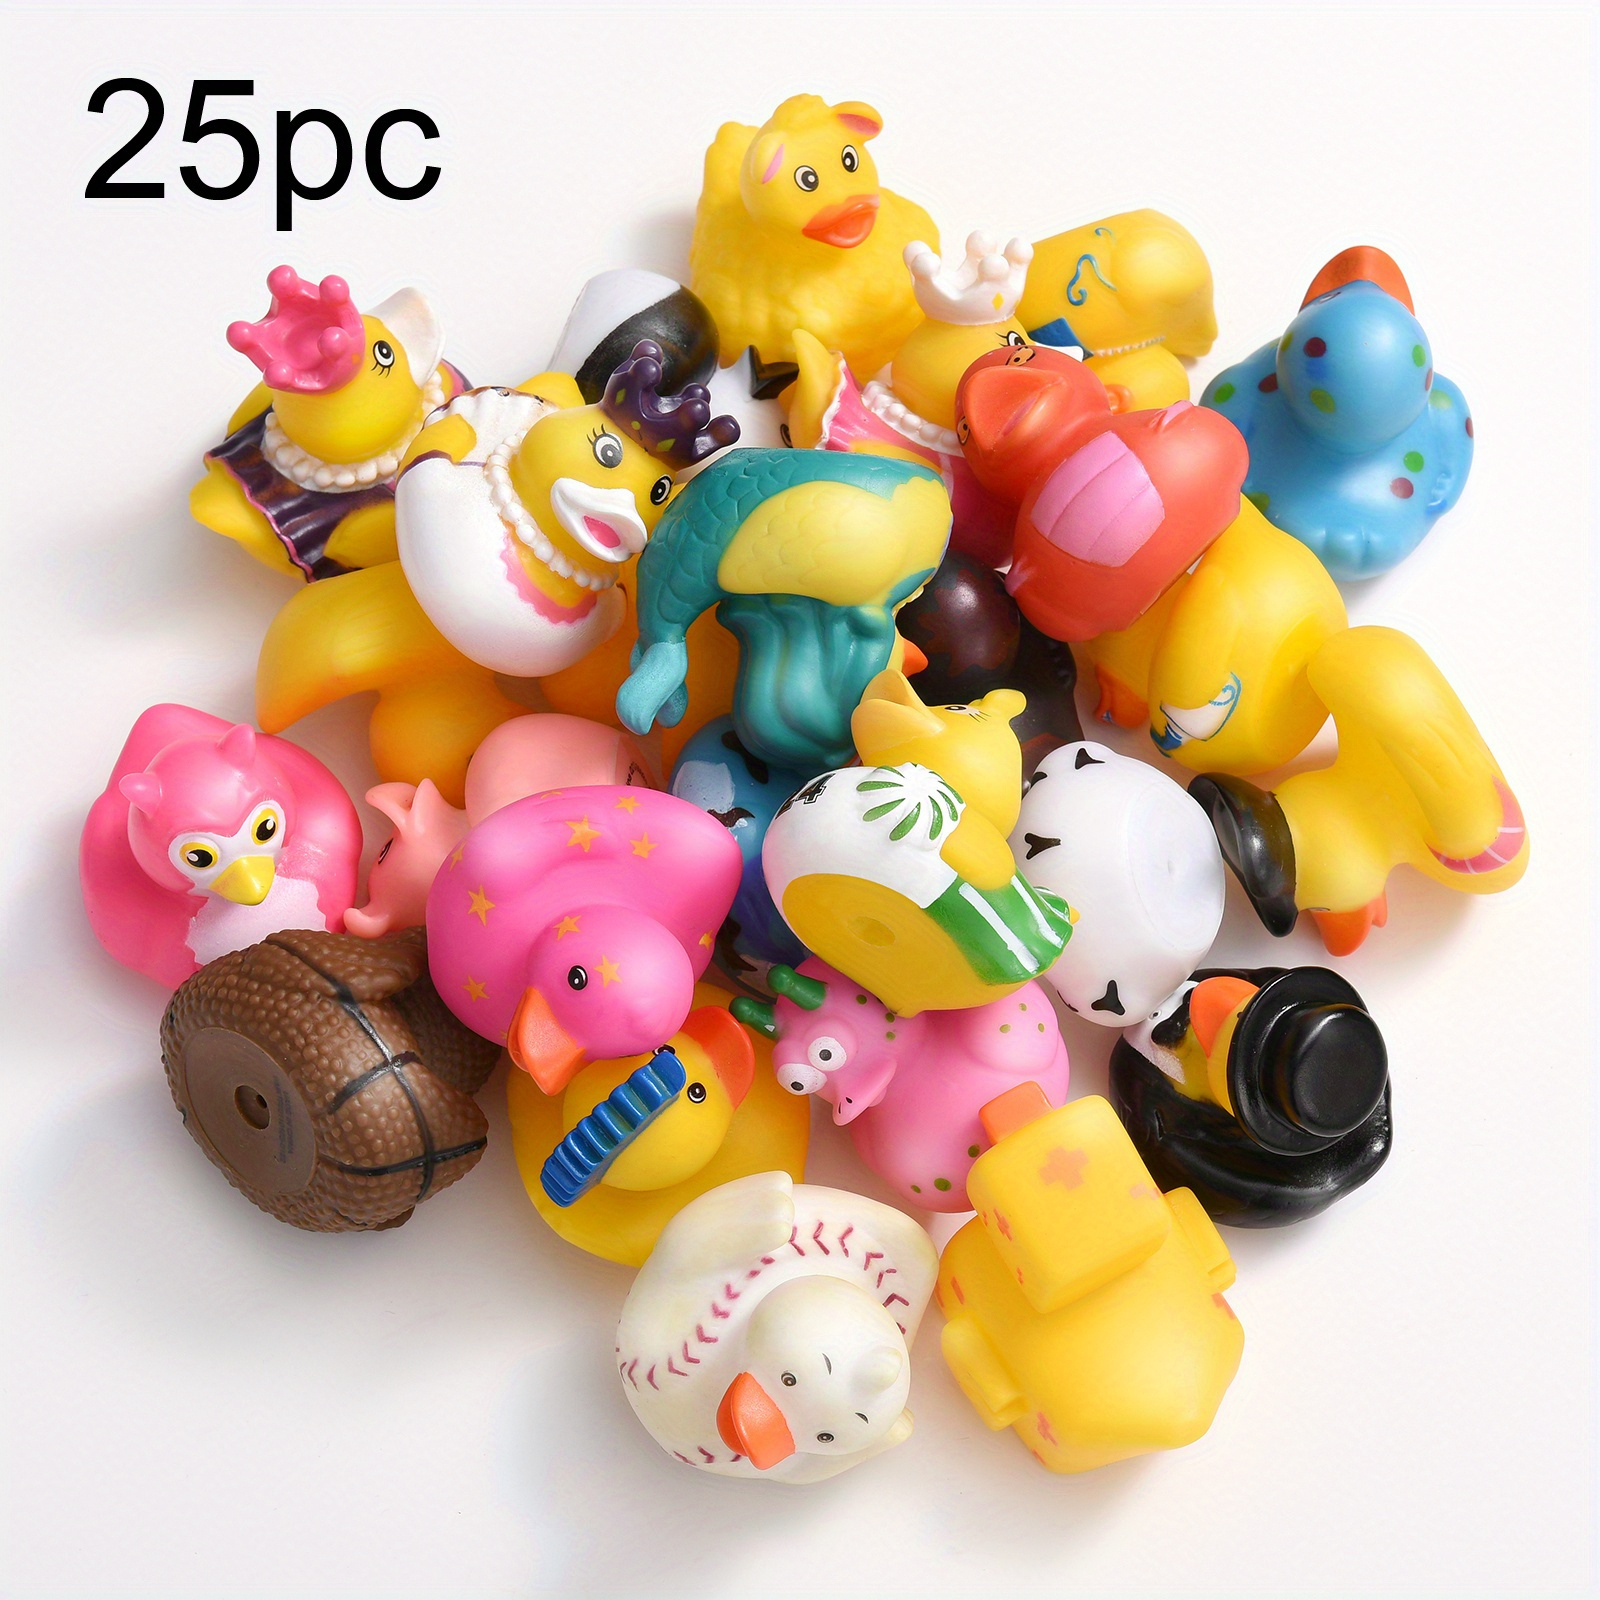 Assortment Rubber Duck Toy Duckies for Kids, Bath Birthday Gifts Baby  Showers Classroom Incentives, Summer Beach and Pool Activity, 2 (10-Pack)